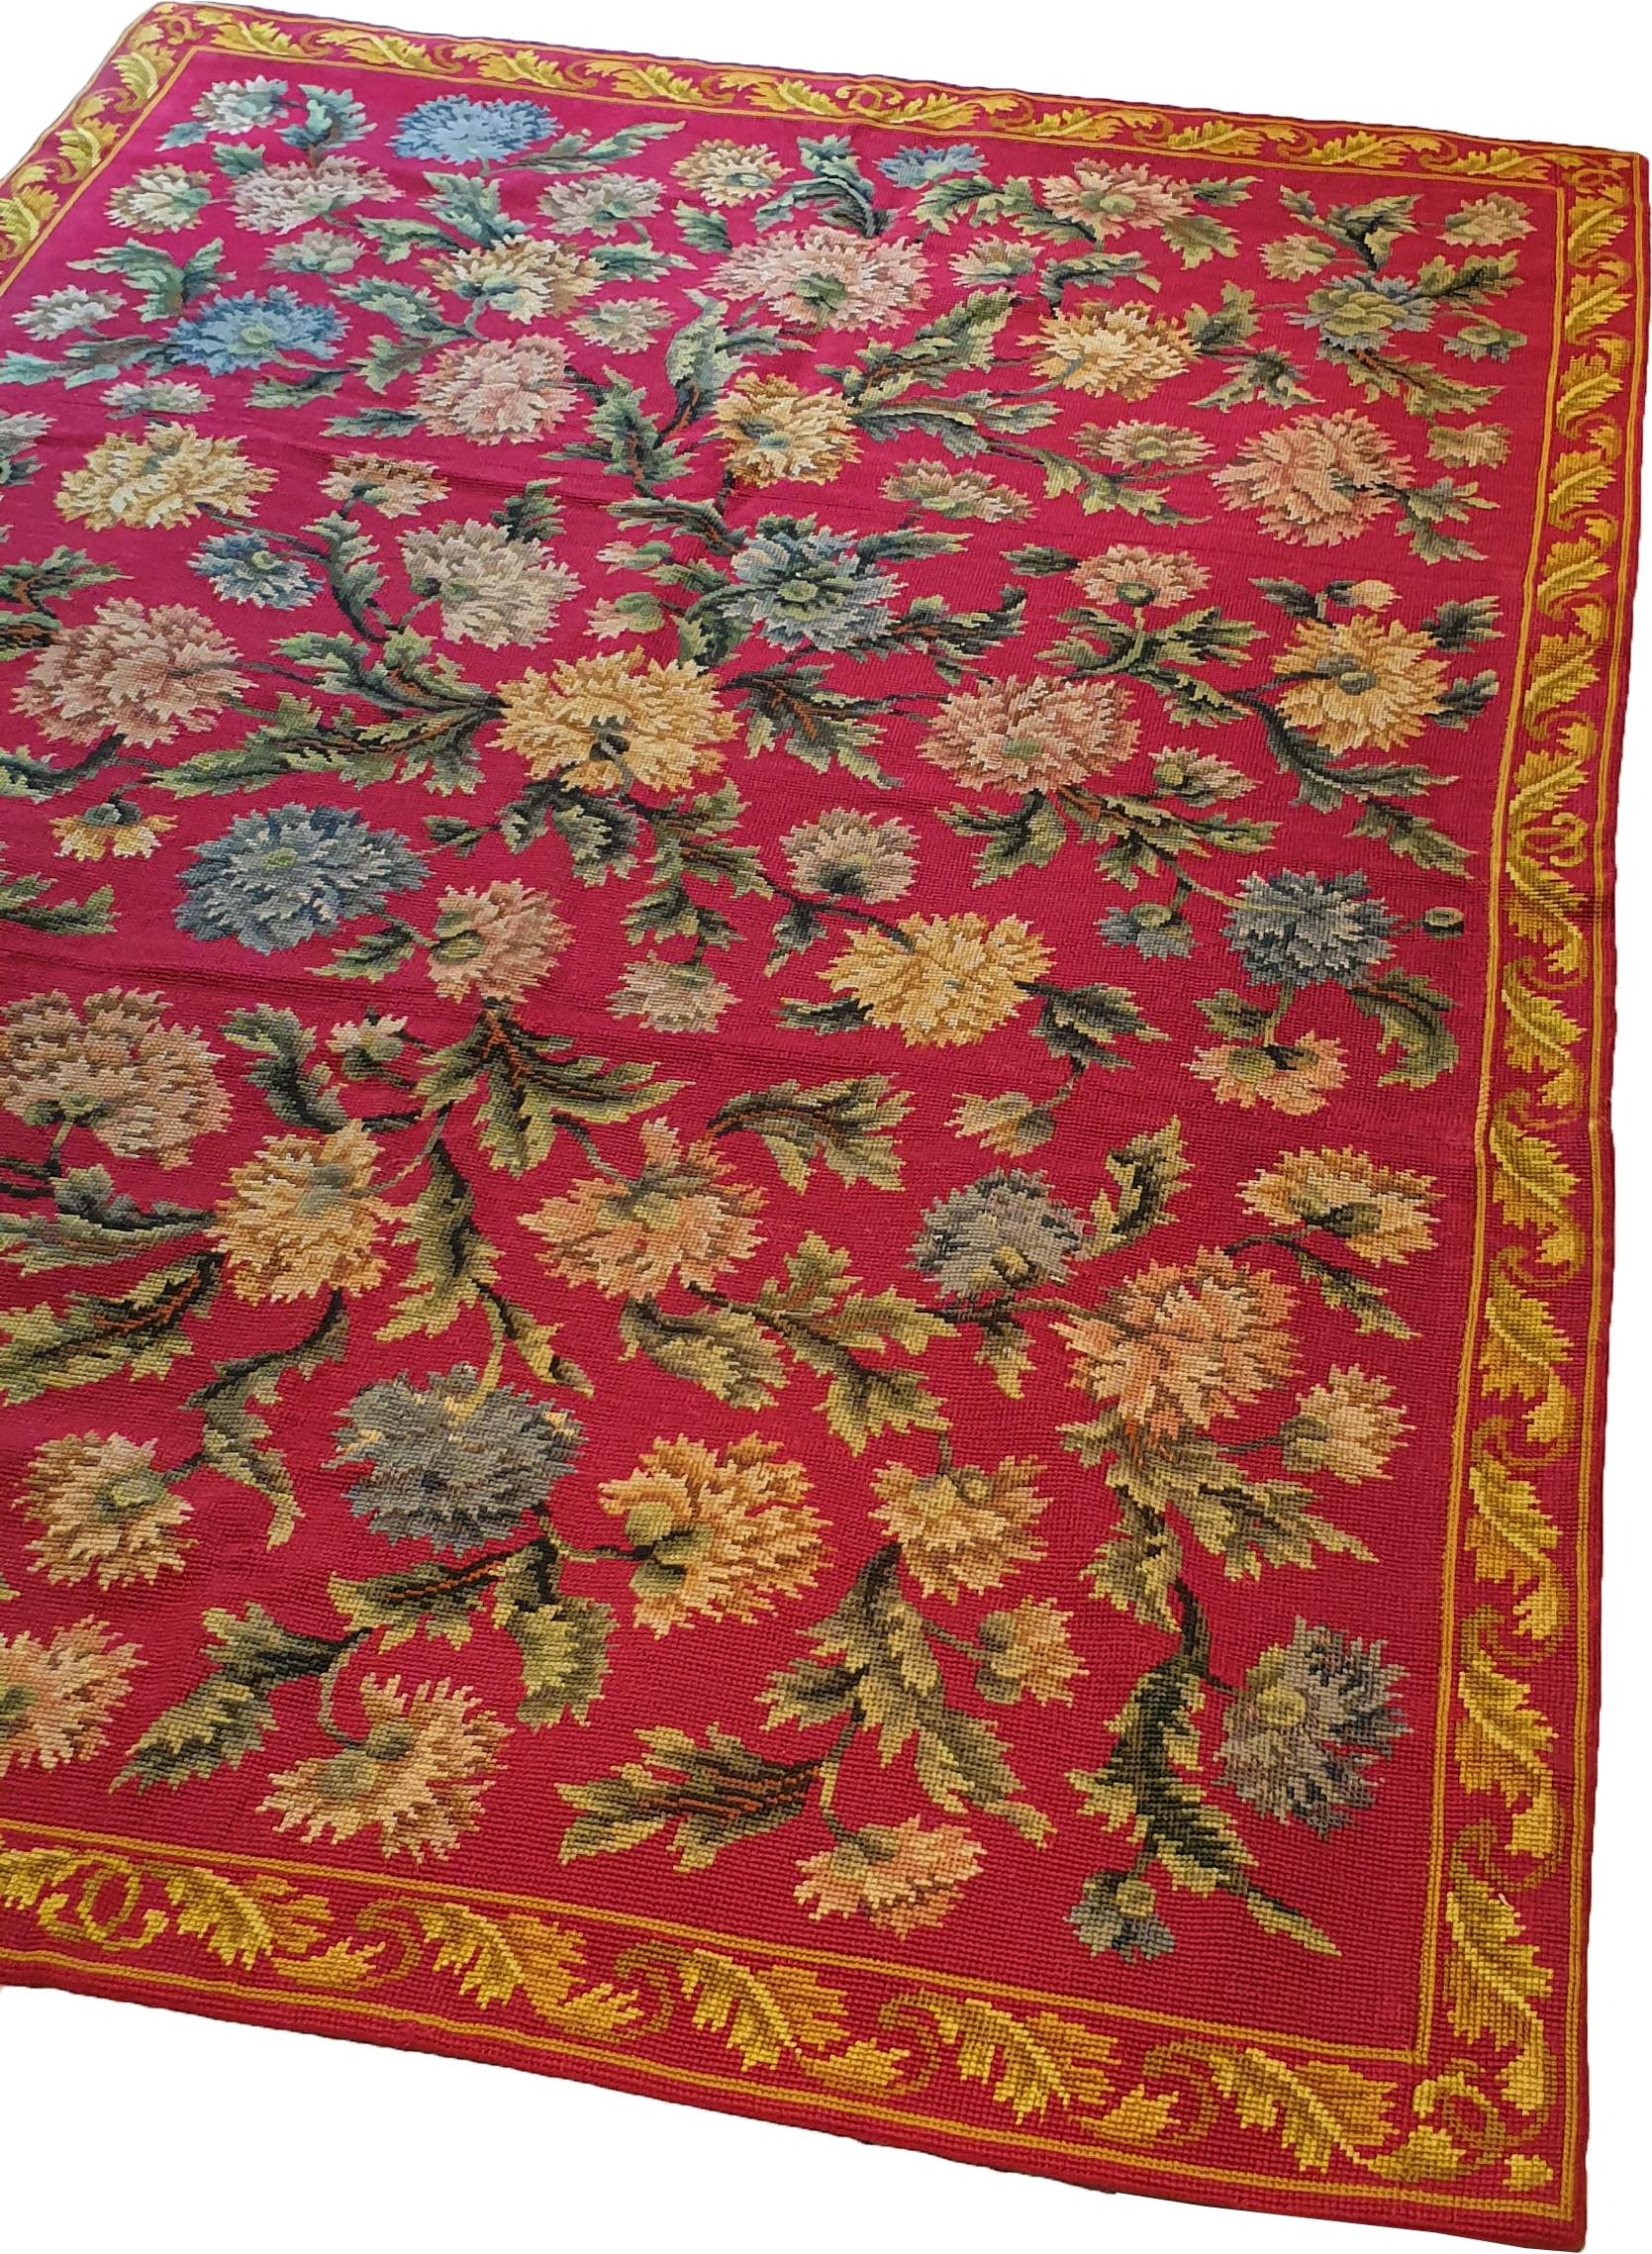 669 - 19th century needlepoint rug floral.